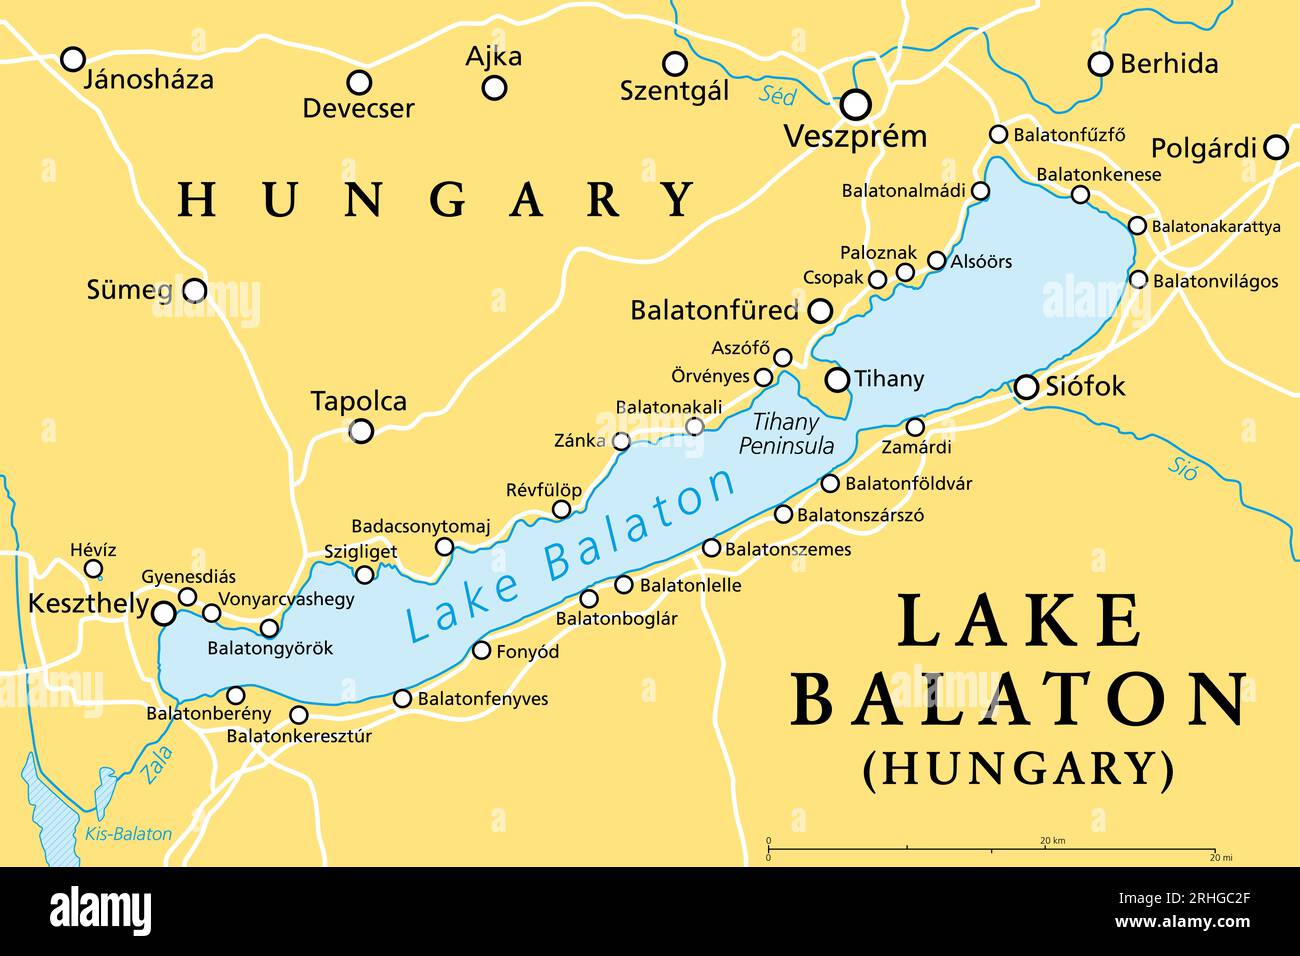 Lake Balaton, political map. Freshwater rift lake in the Transdanubian region of Hungary in Europe. Tourist region with many resort towns. Stock Photo